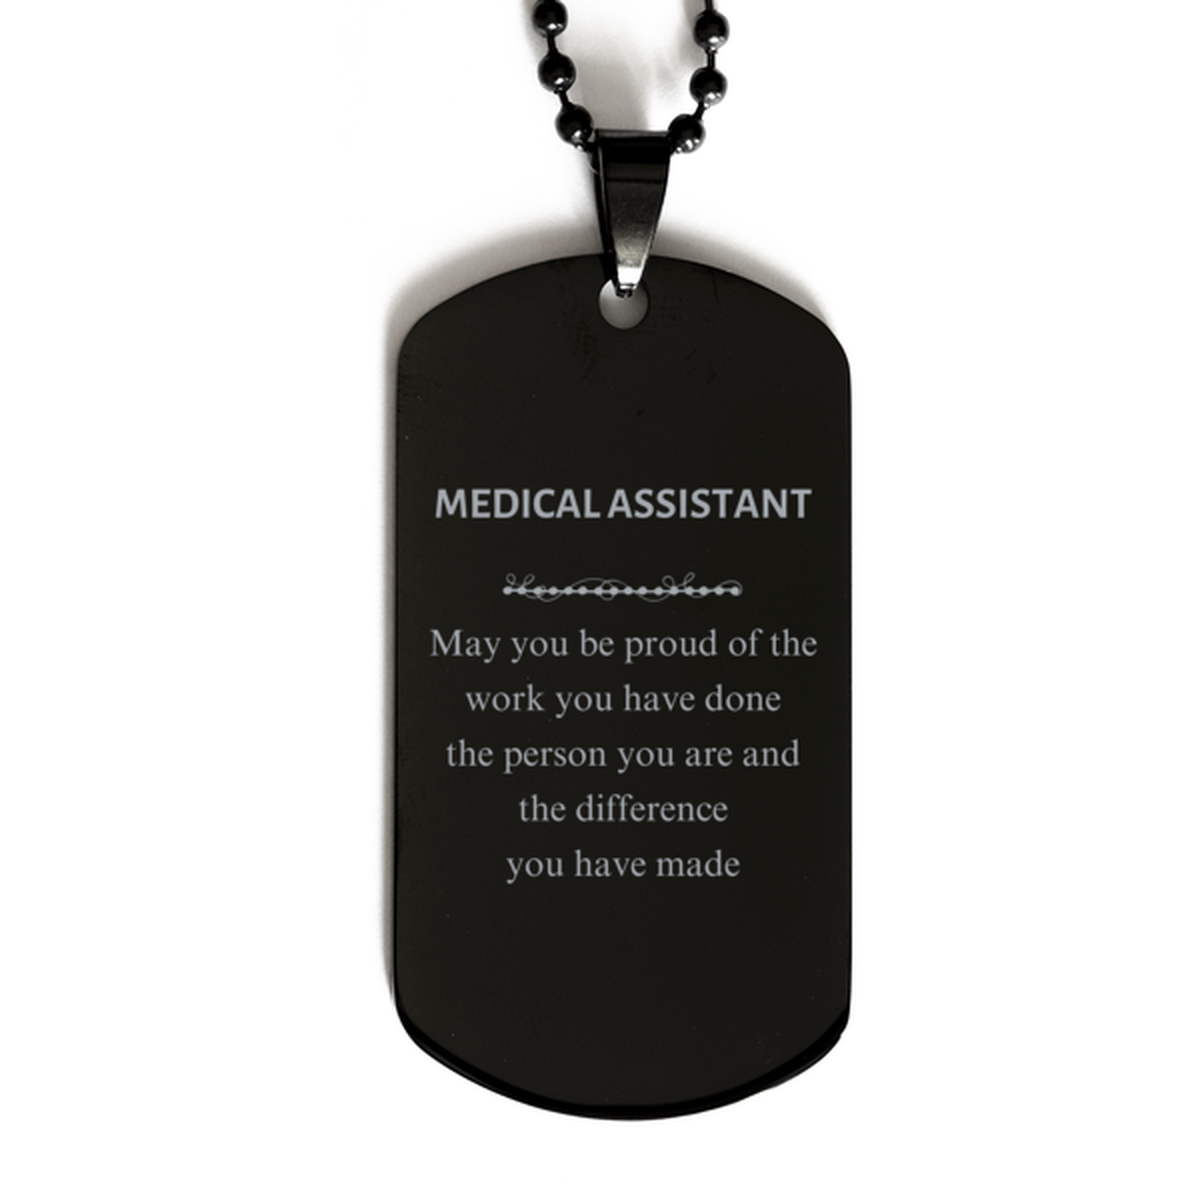 Medical Assistant May you be proud of the work you have done, Retirement Medical Assistant Black Dog Tag for Colleague Appreciation Gifts Amazing for Medical Assistant